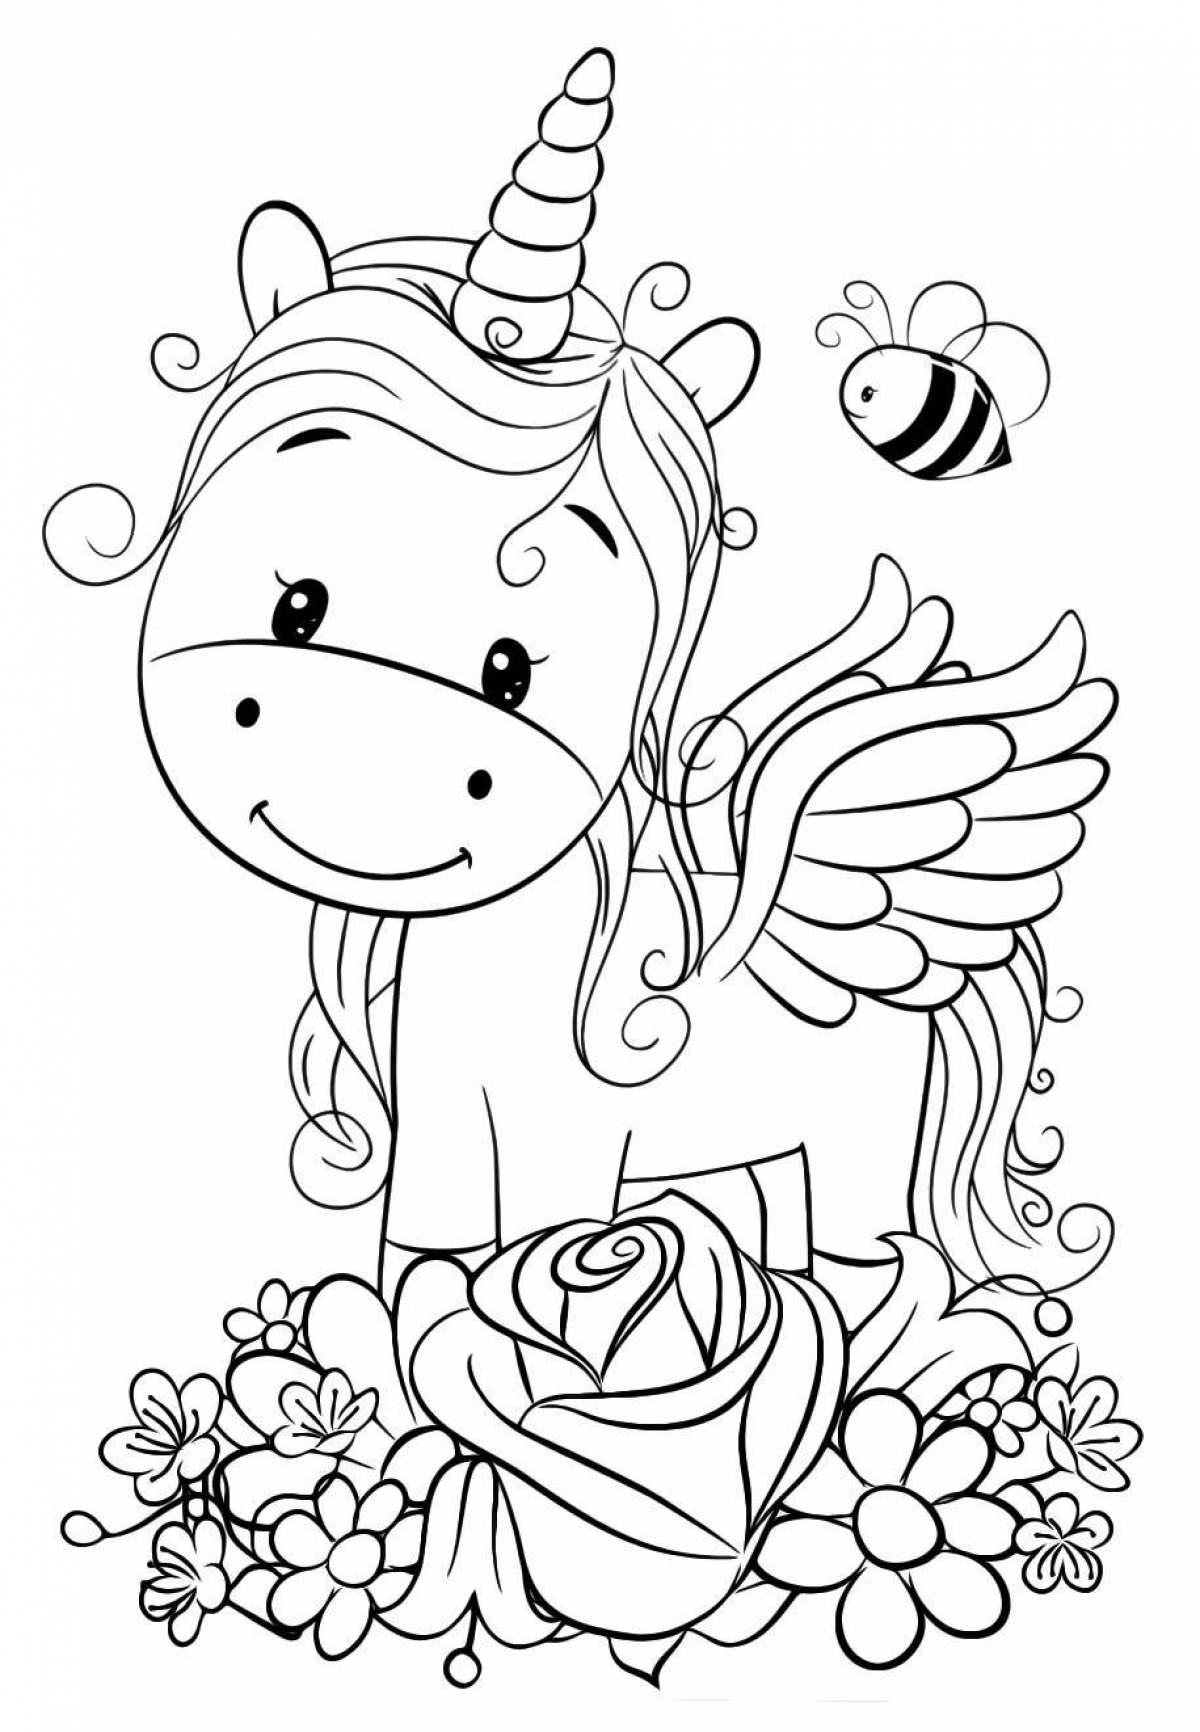 Coloring pages for children 5-6 years old unicorns